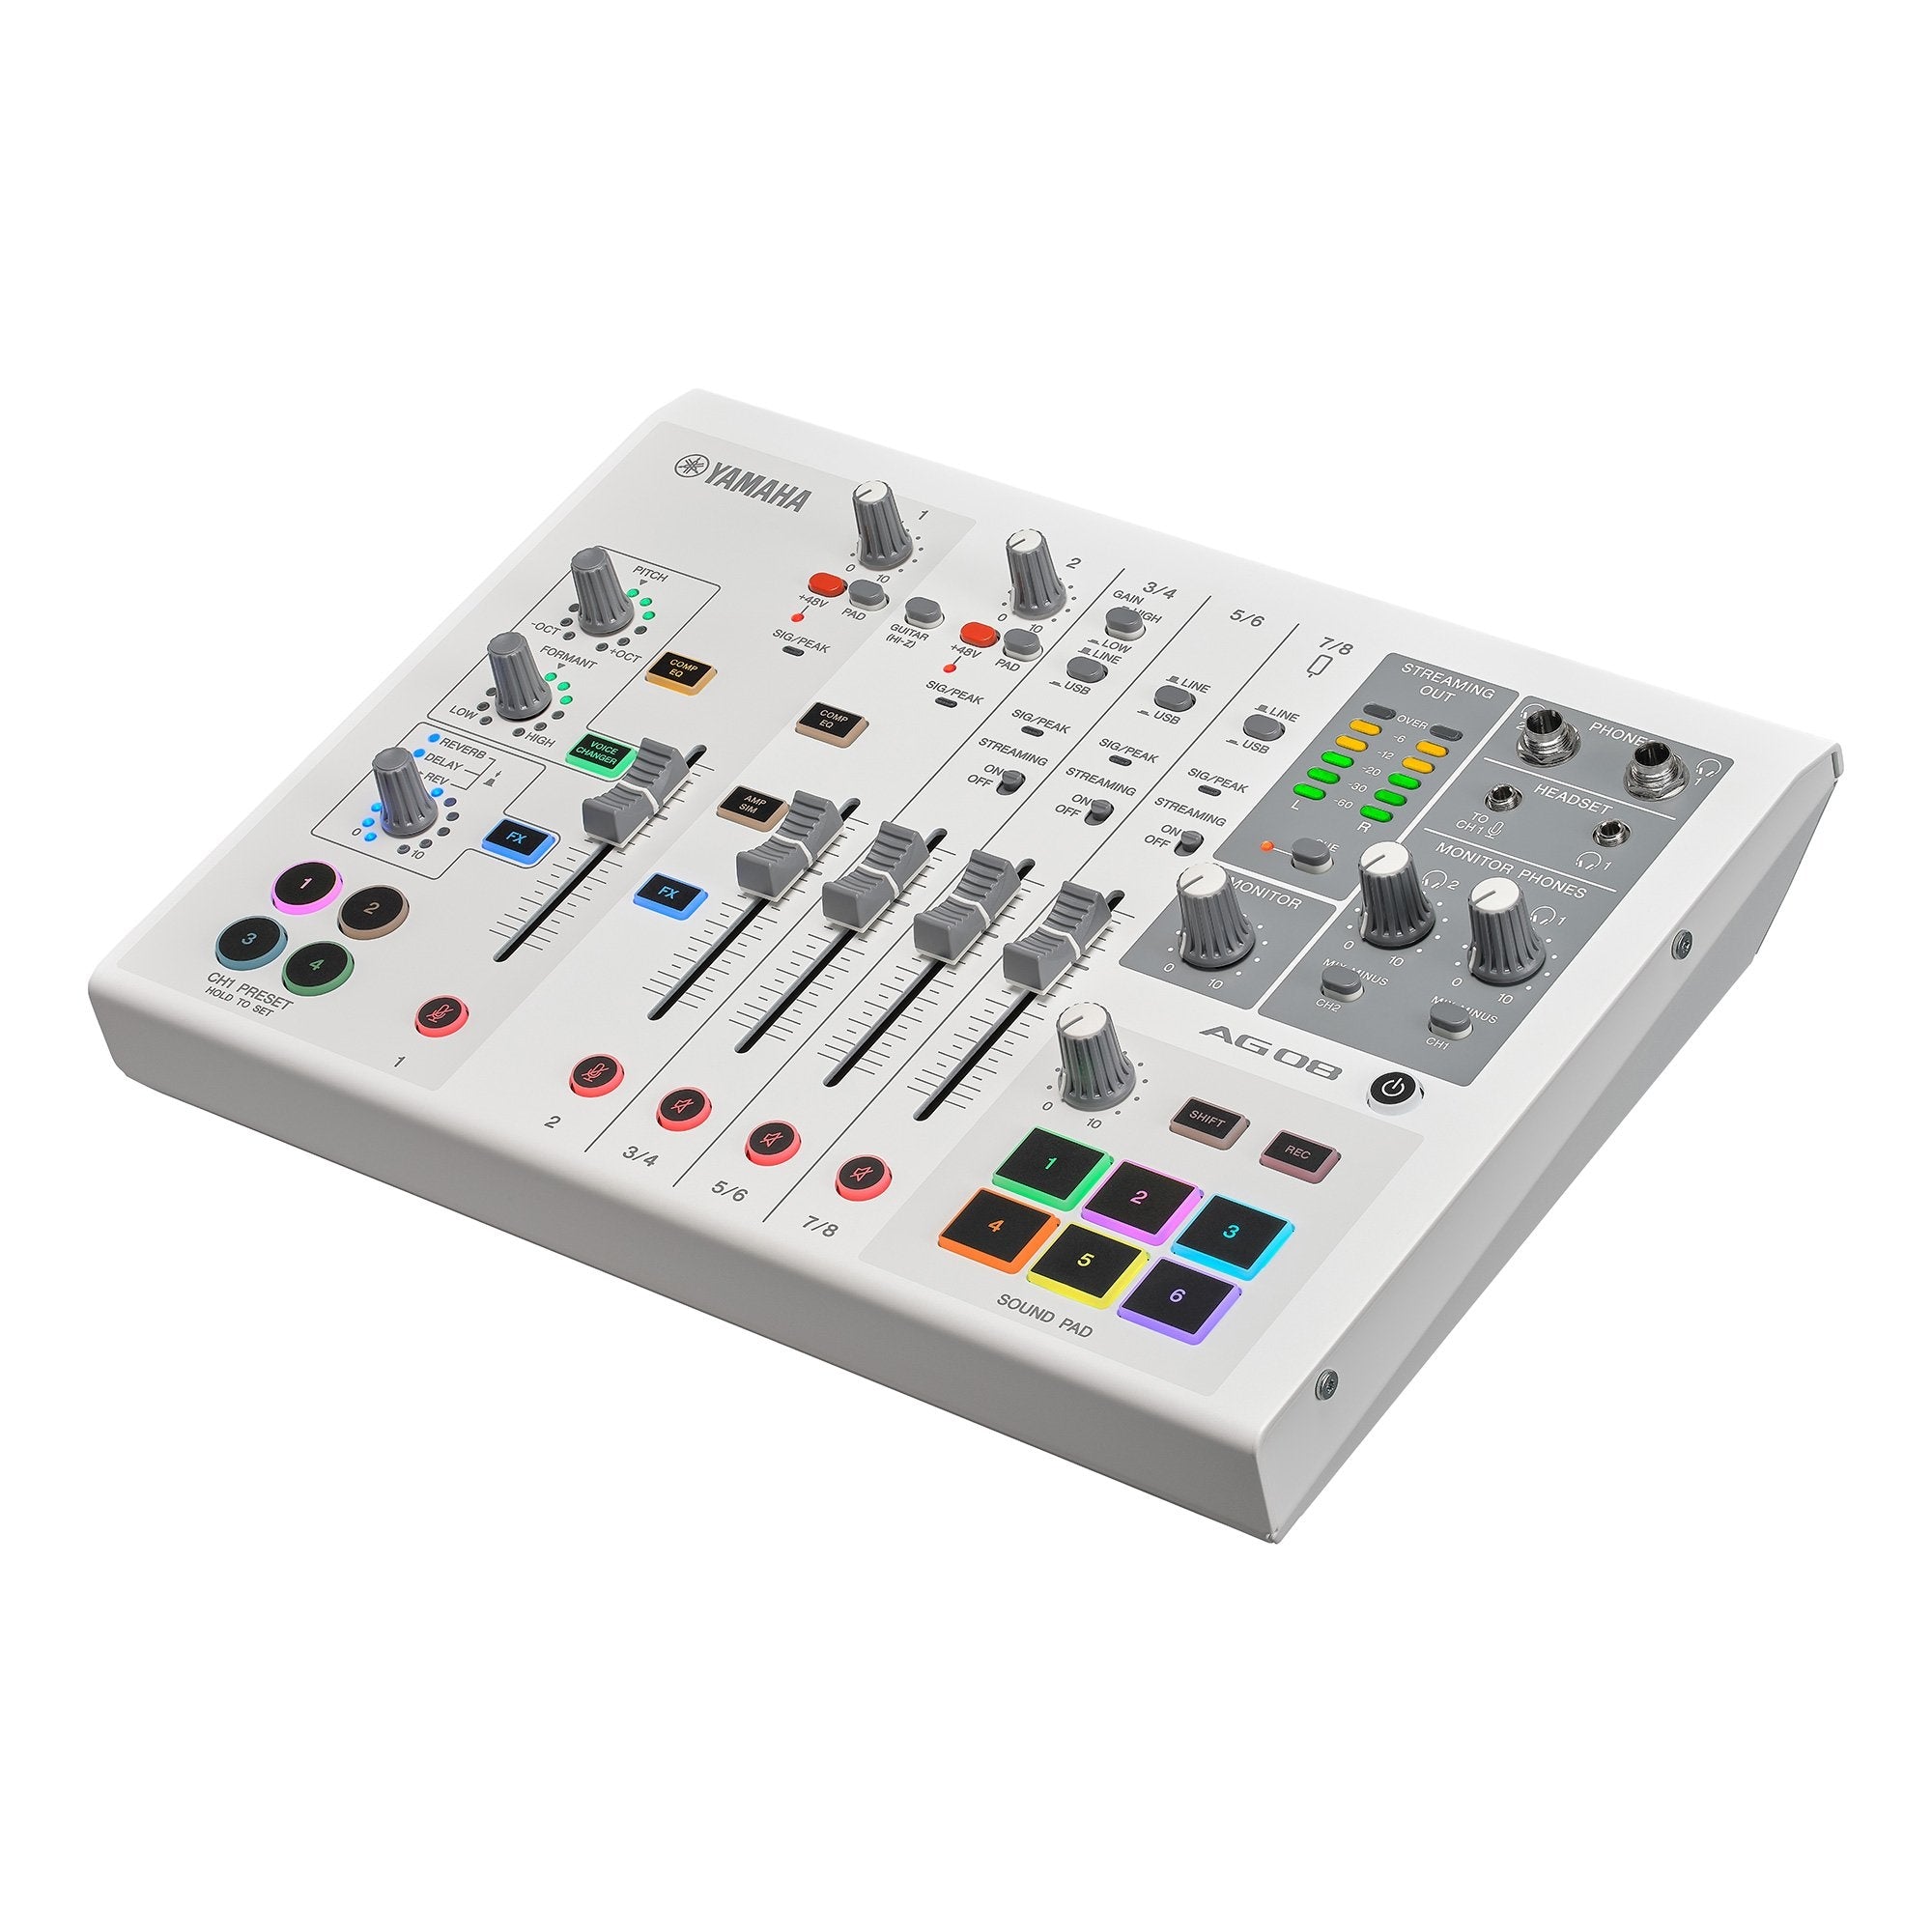 Yamaha AG08 8-channel Mixer / Audio Interface / Podcast - White